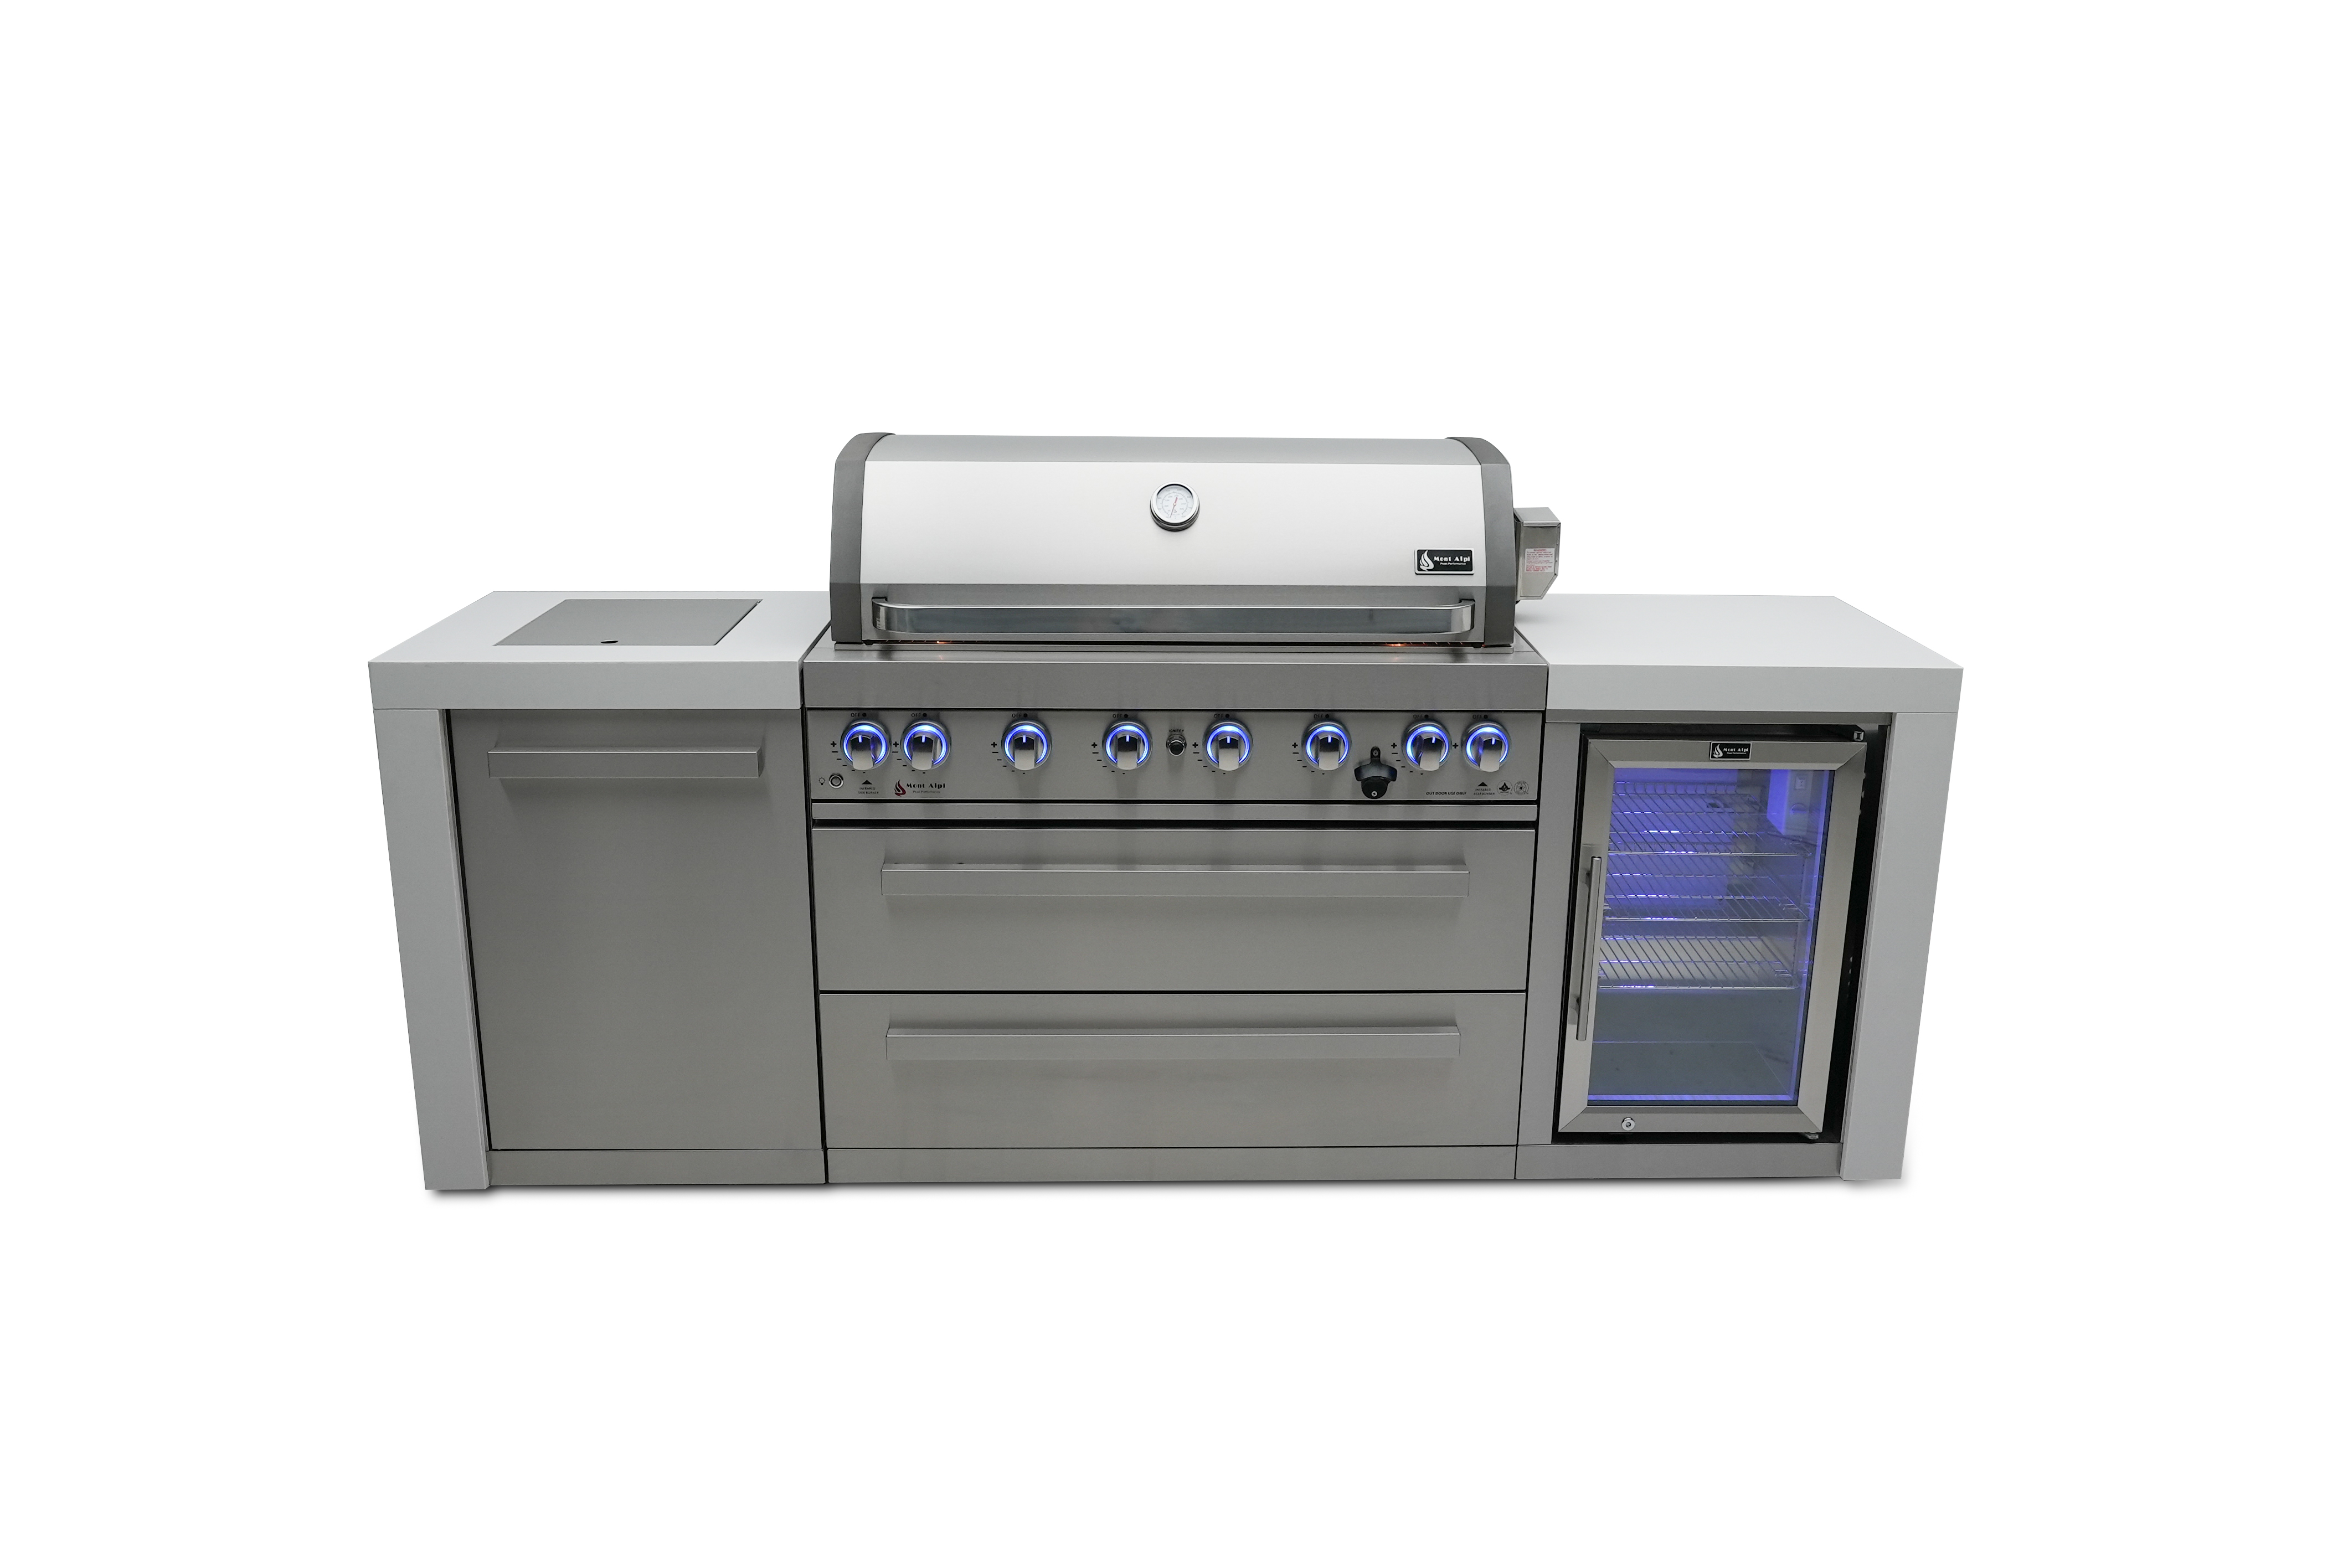 Mont Alpi 805 Grill Deluxe Island with Fridge cabinet - image 1 of 3